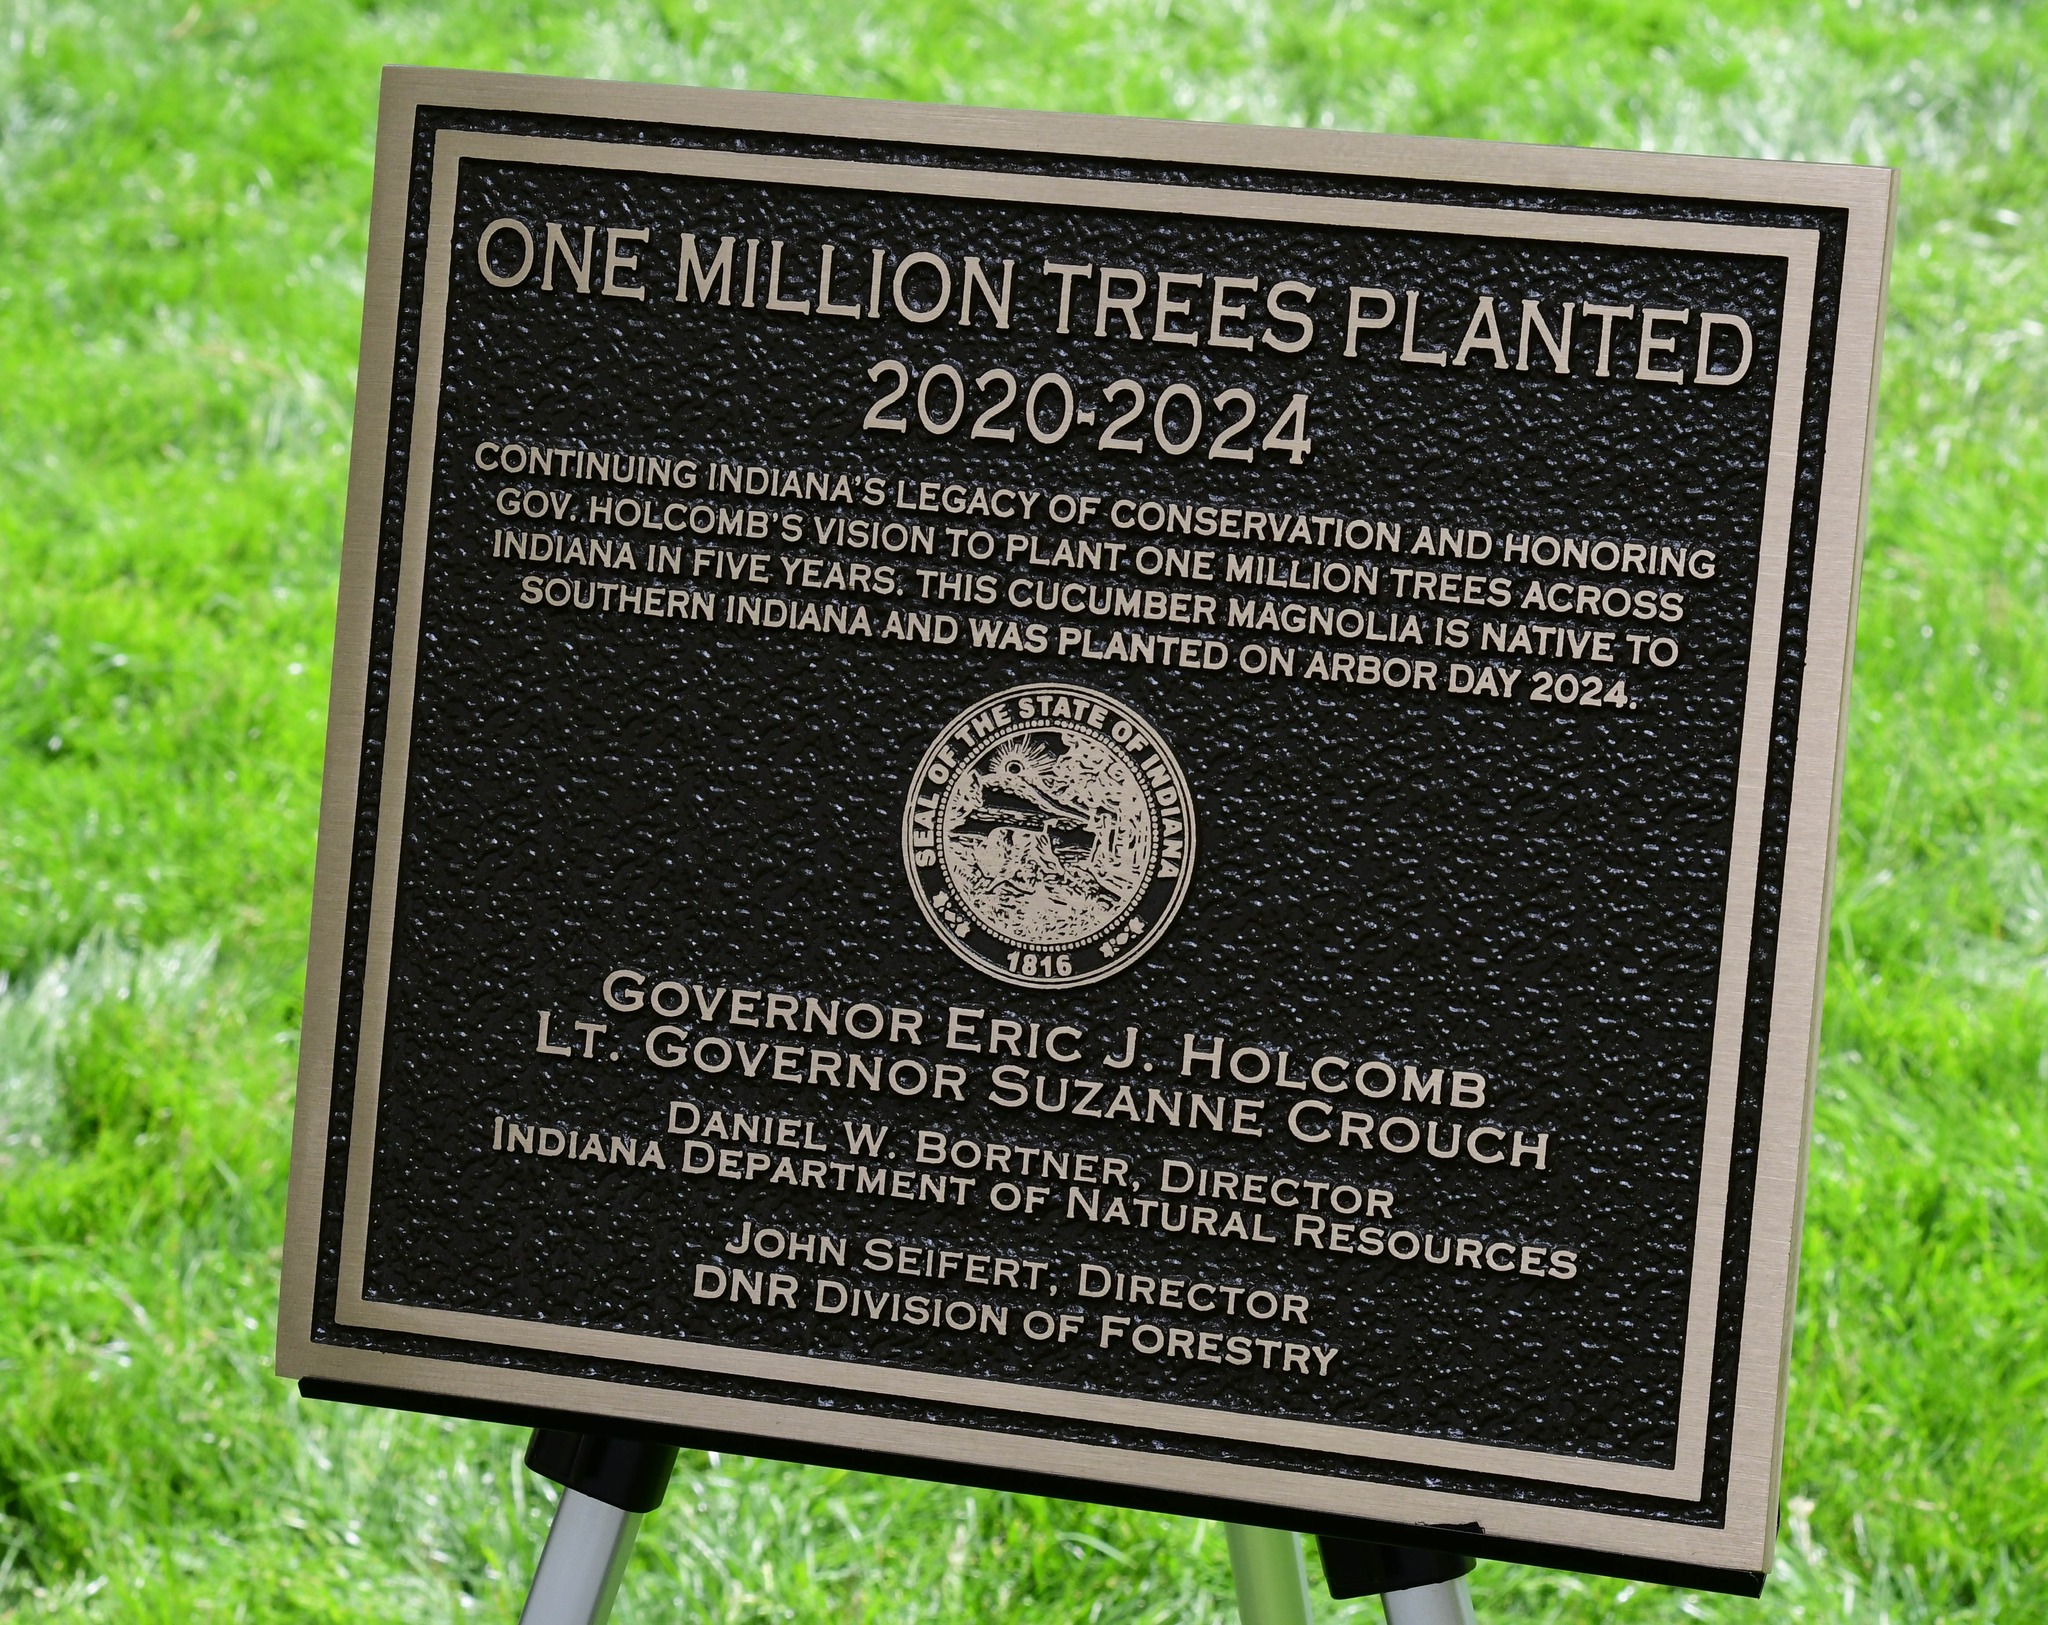 One Million Trees Planted 2020-2024